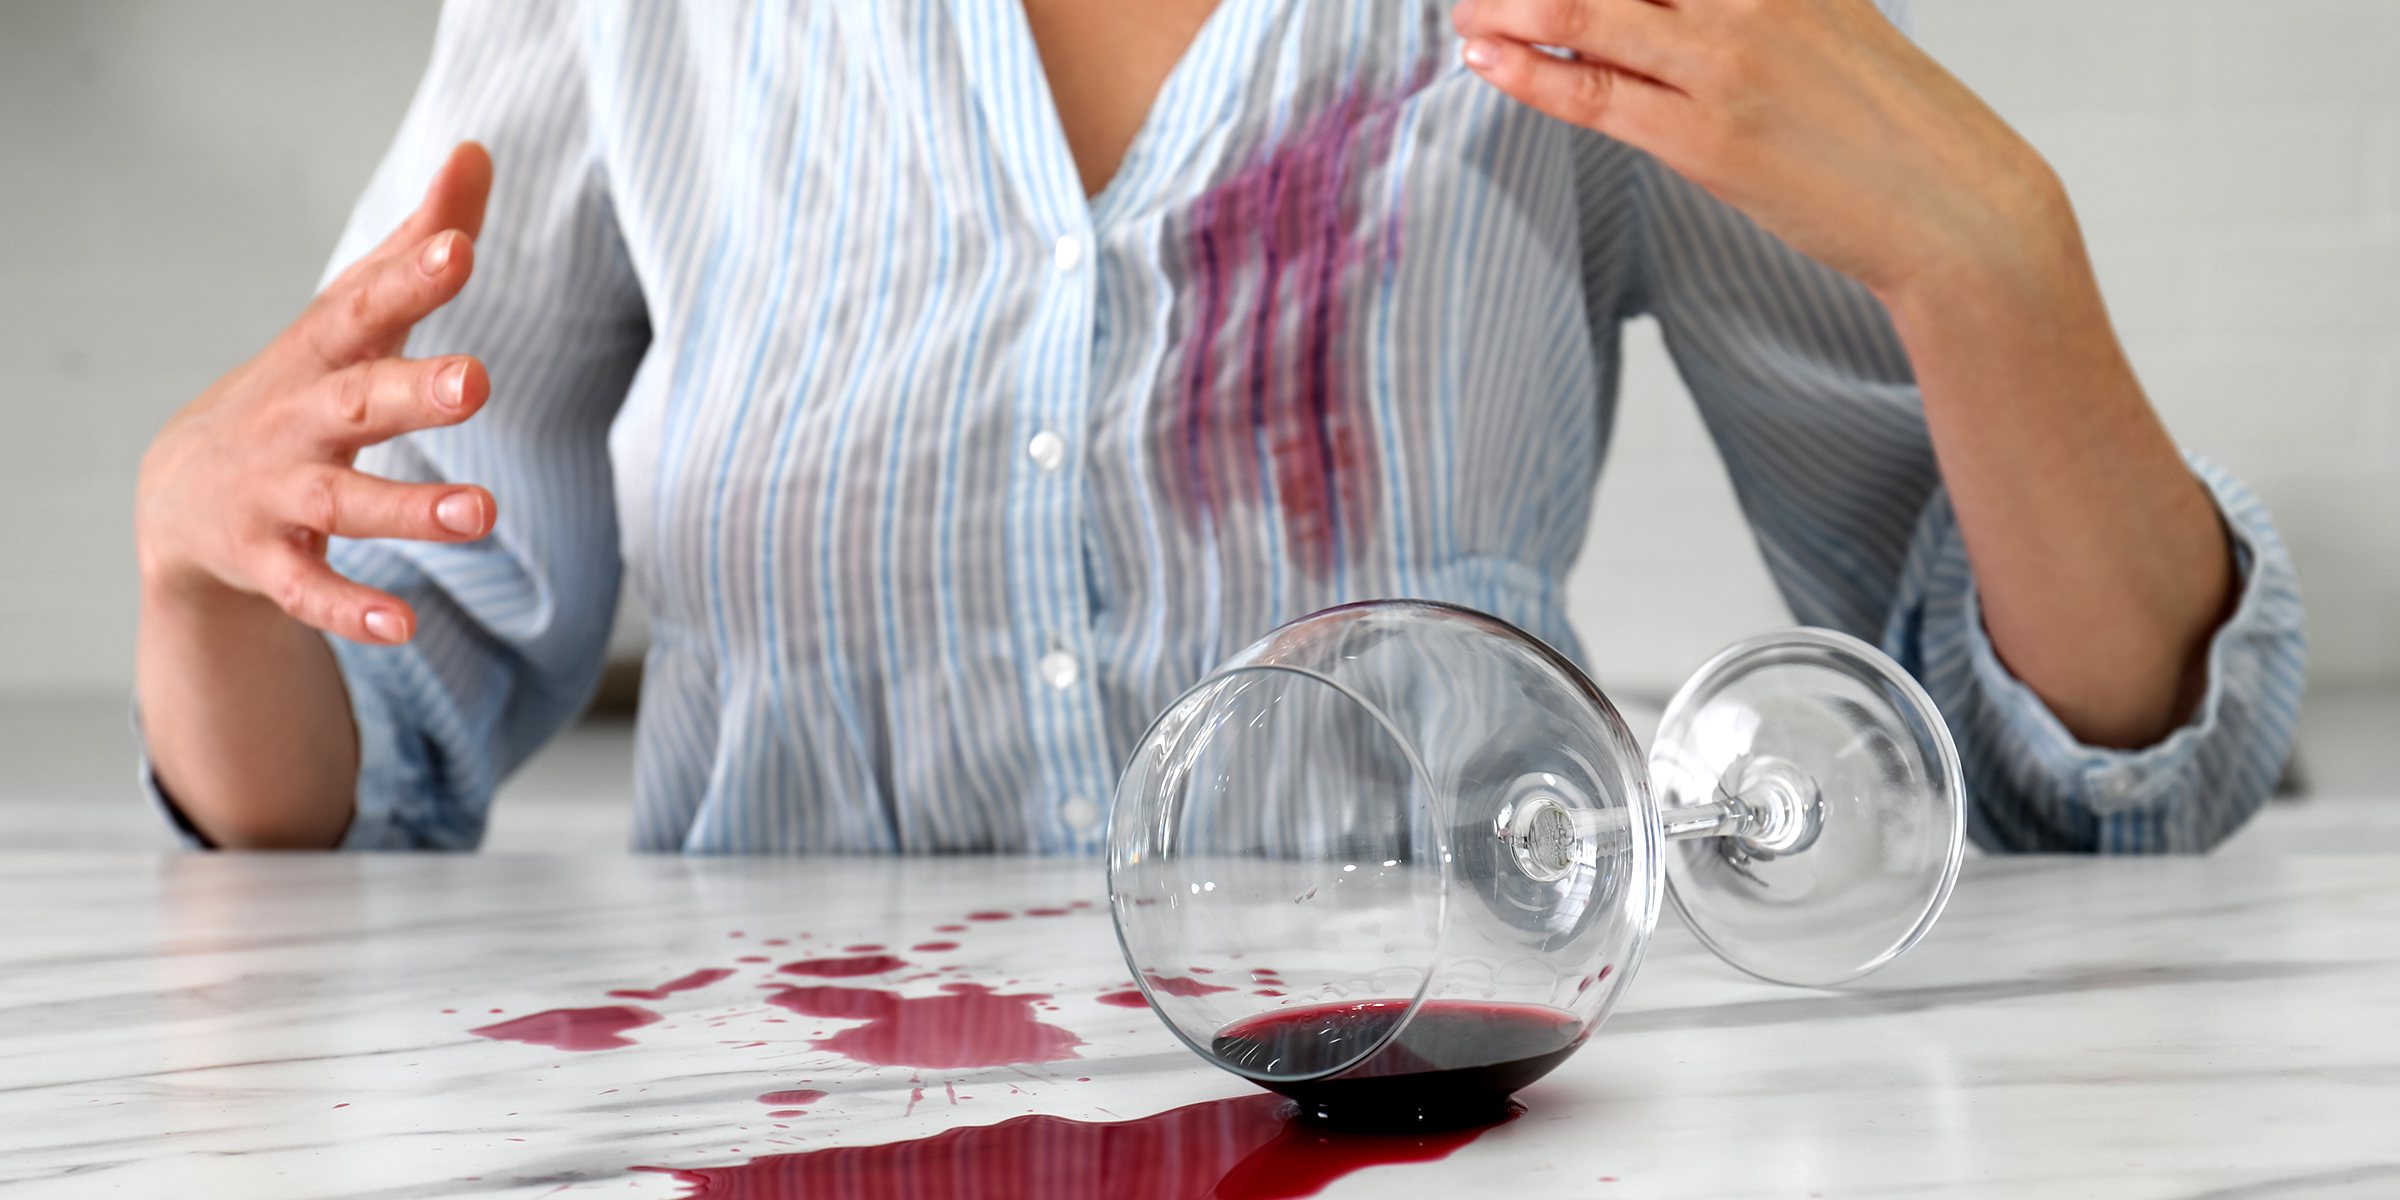 Man spills wine on his mom's dress during his brother's wedding. | Source: Shutterstock